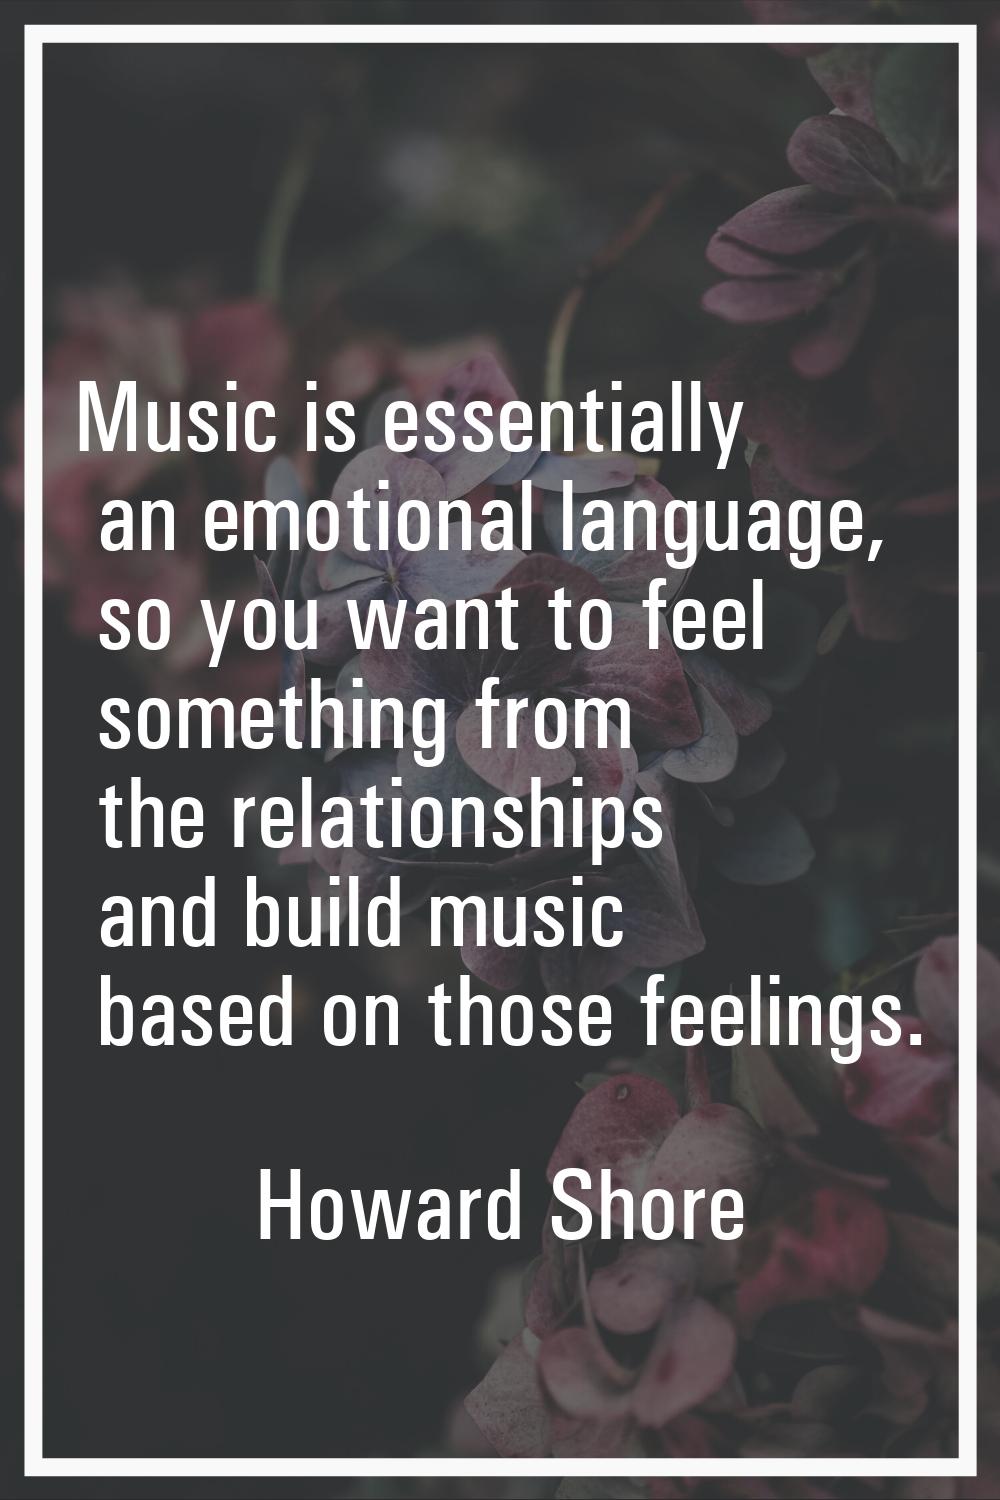 Music is essentially an emotional language, so you want to feel something from the relationships an